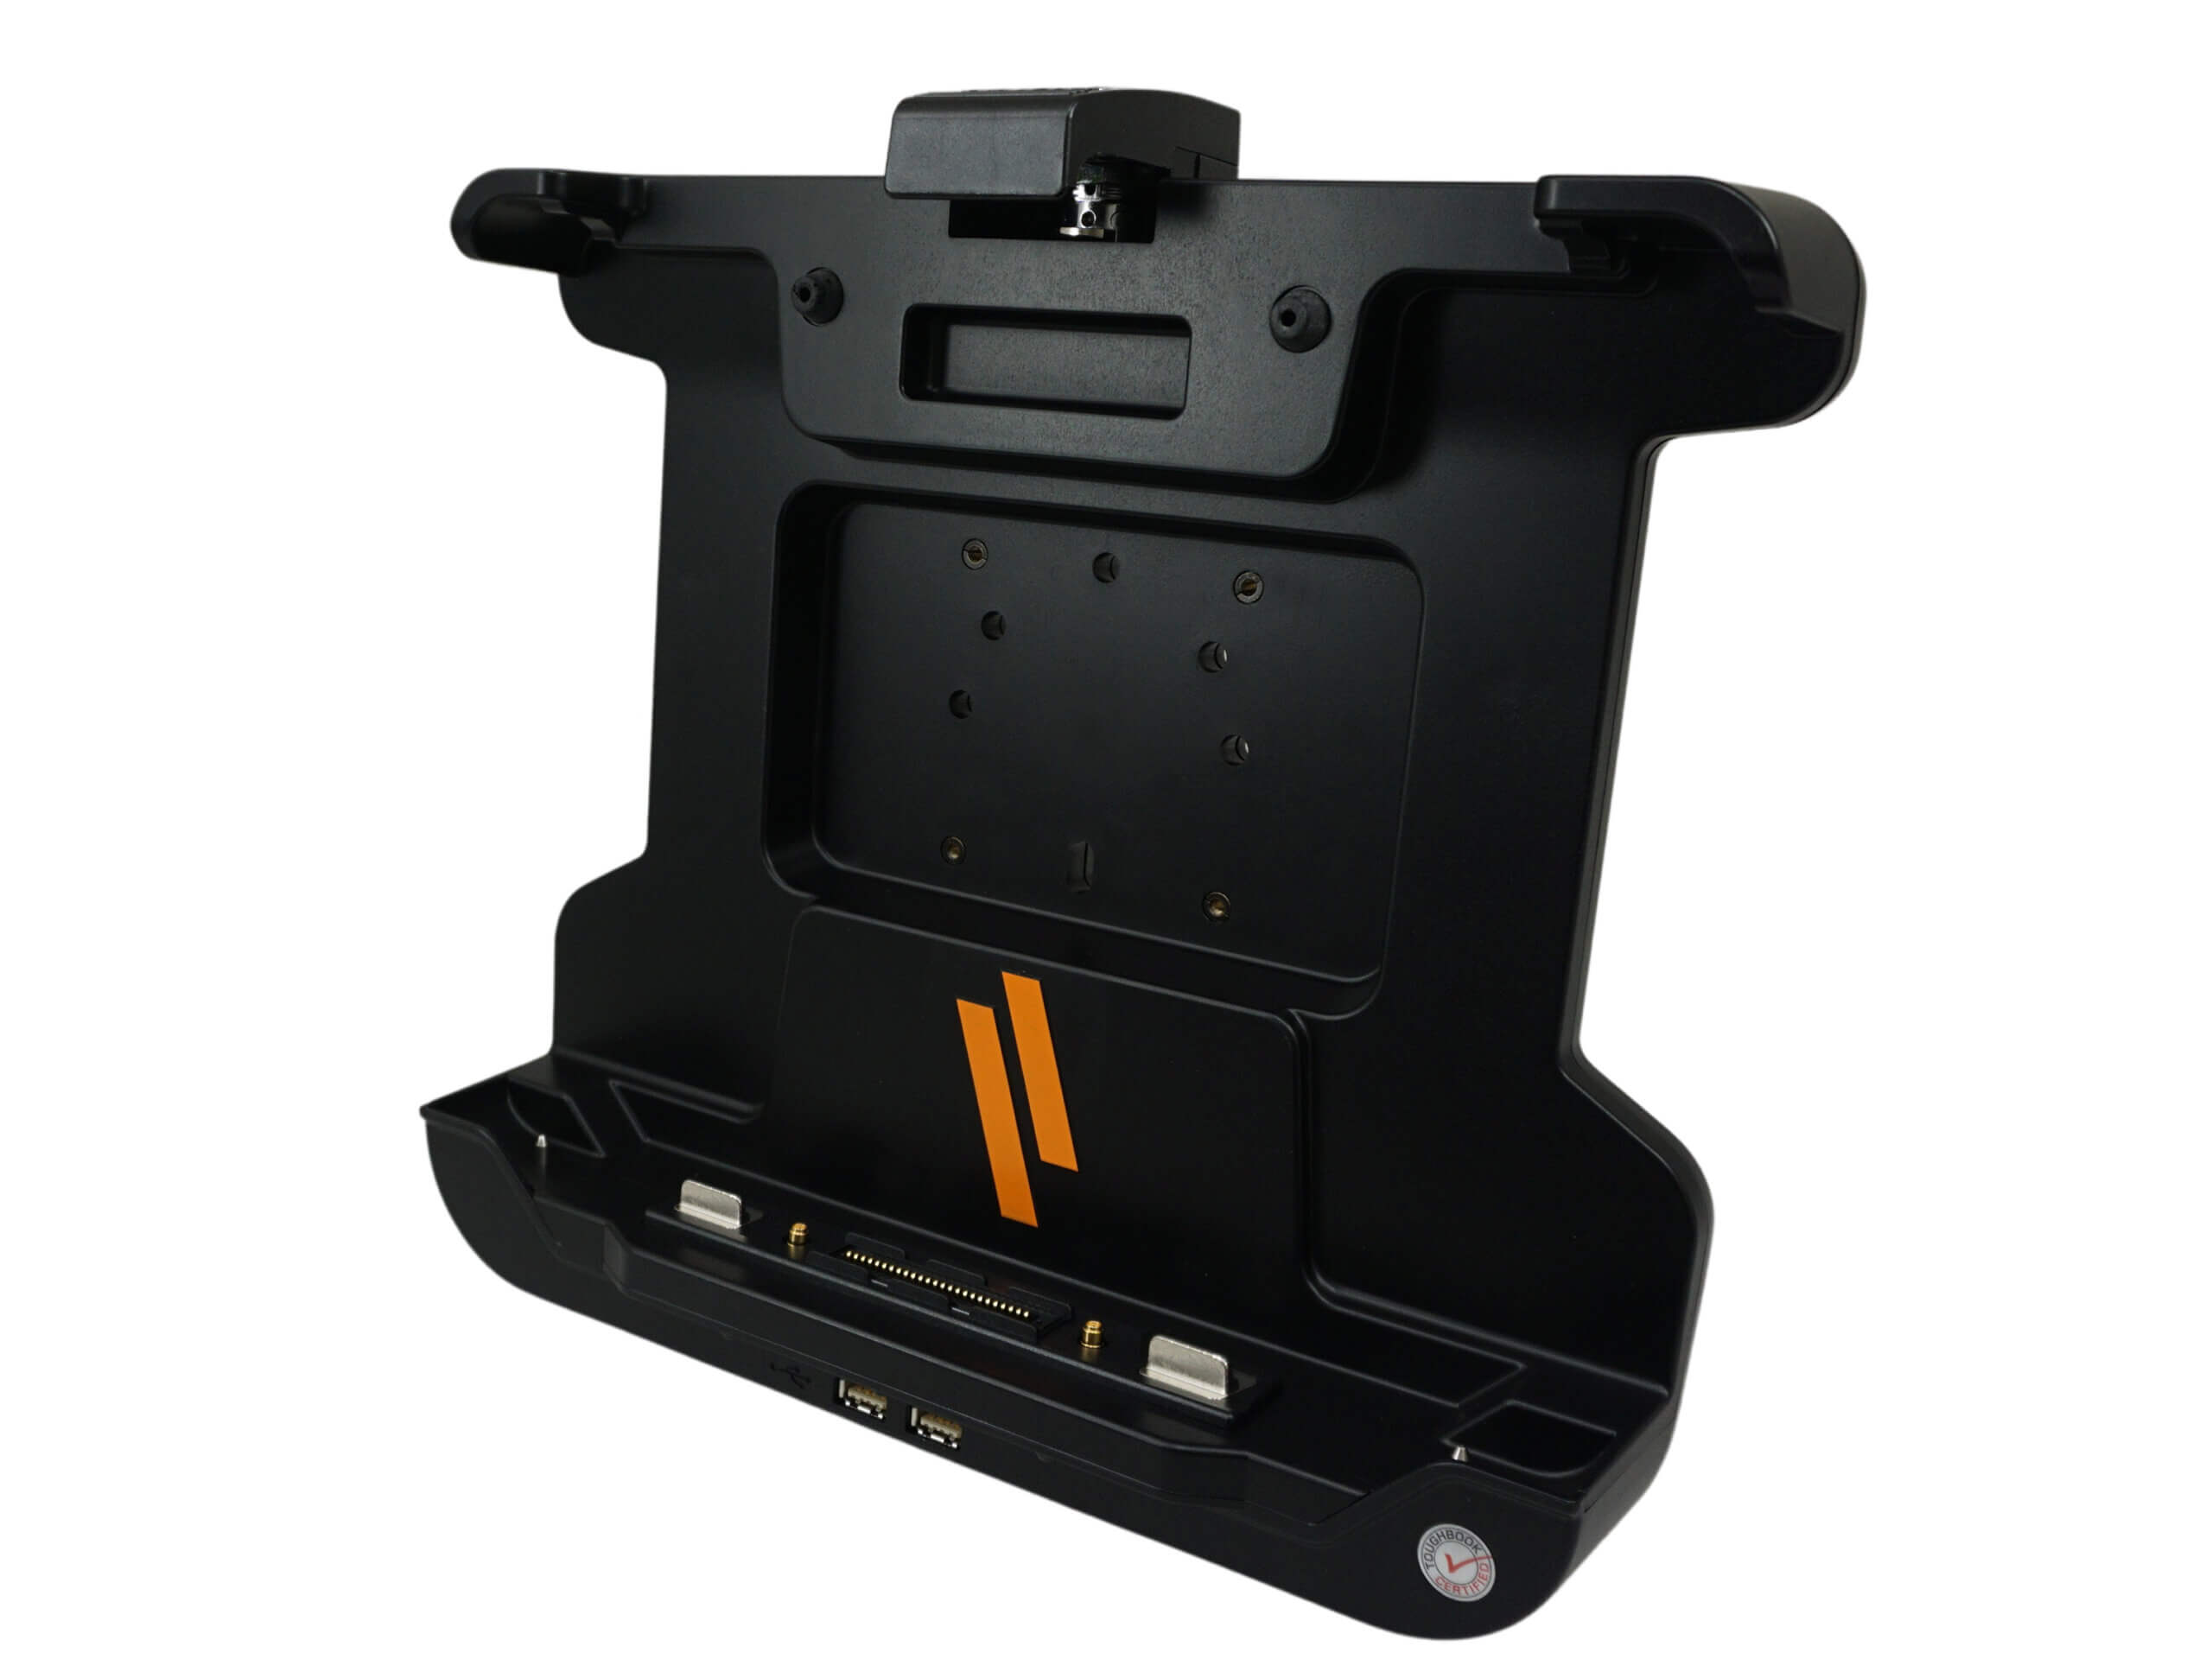 Docking Station For Panasonic TOUGHBOOK 33 Tablet with Standard Port Replication & Dual Pass-Thru Antenna Connections